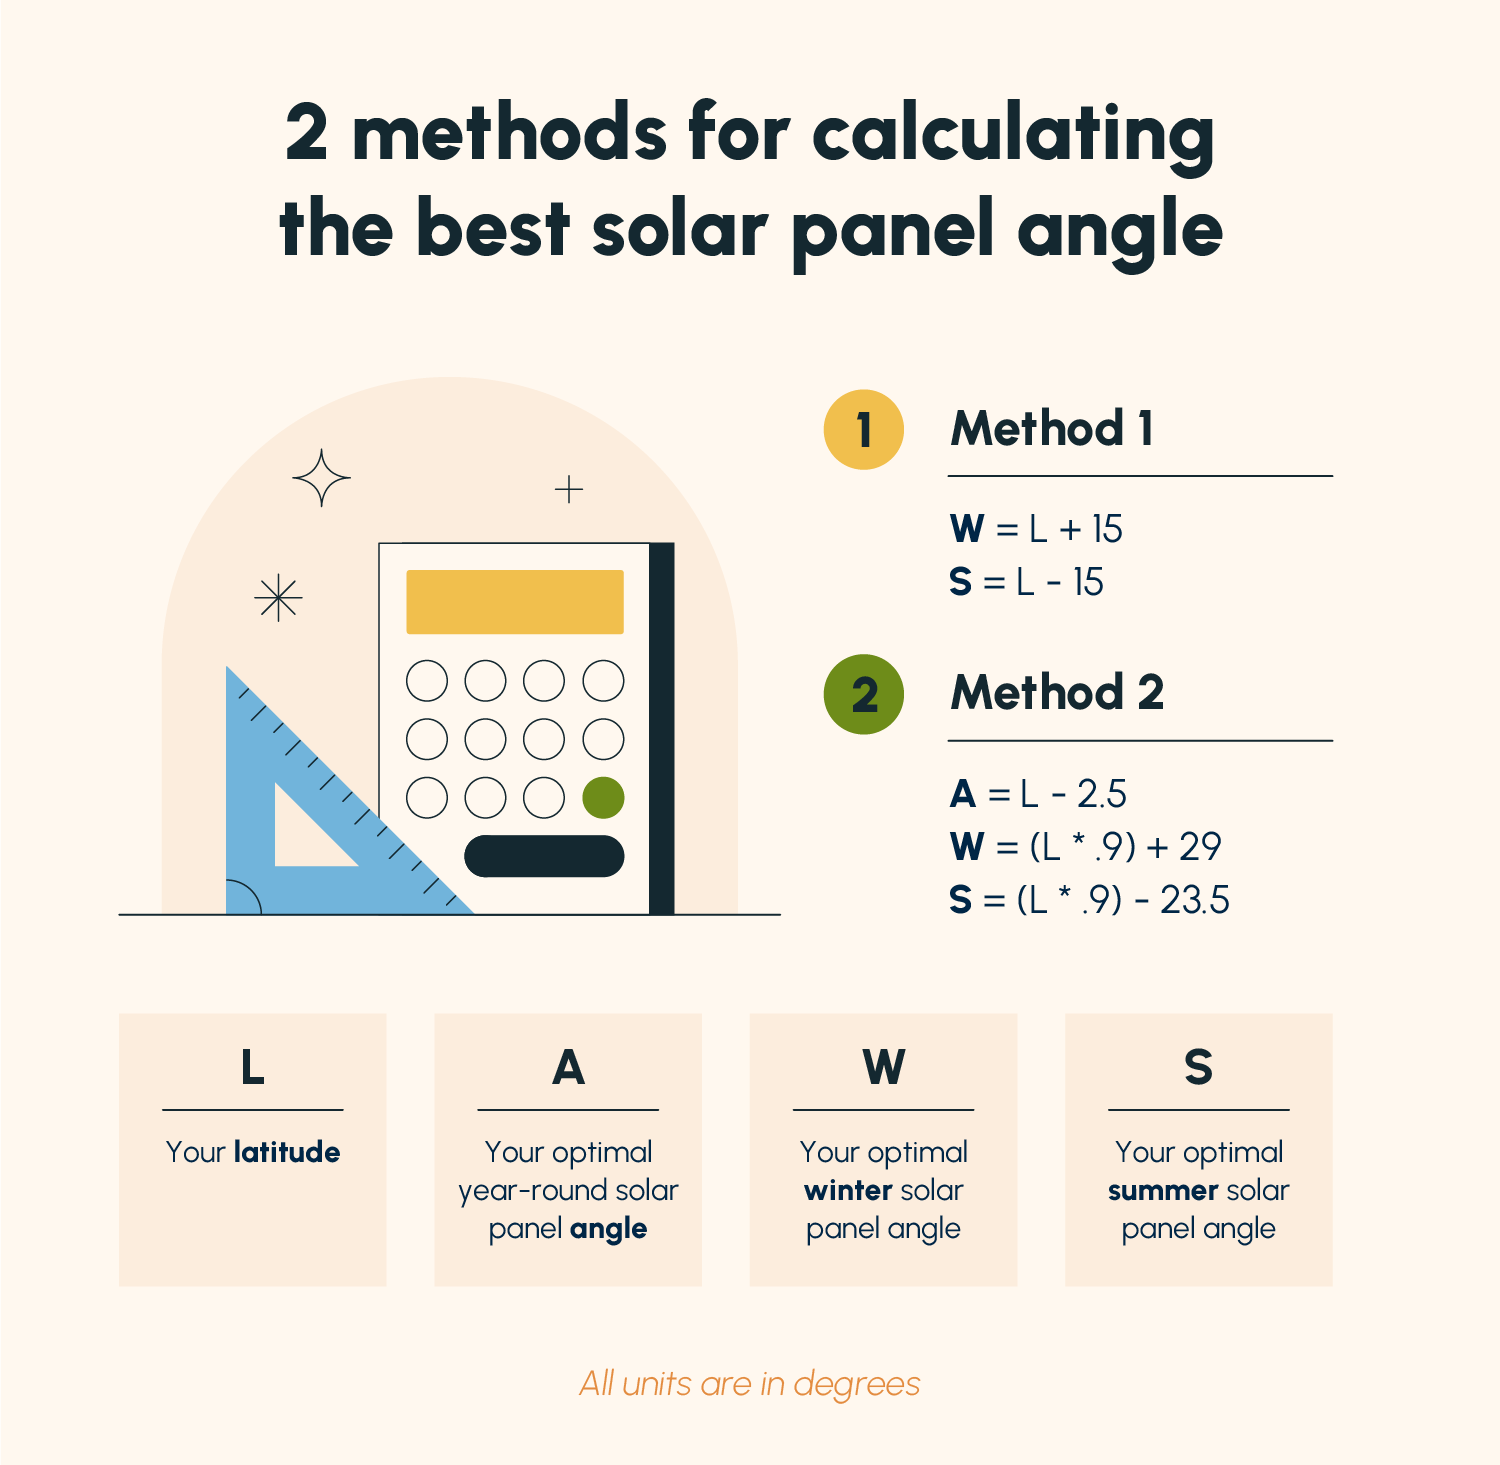 A breakdown of how to determine the best solar panel angle by ZIP code based on latitude